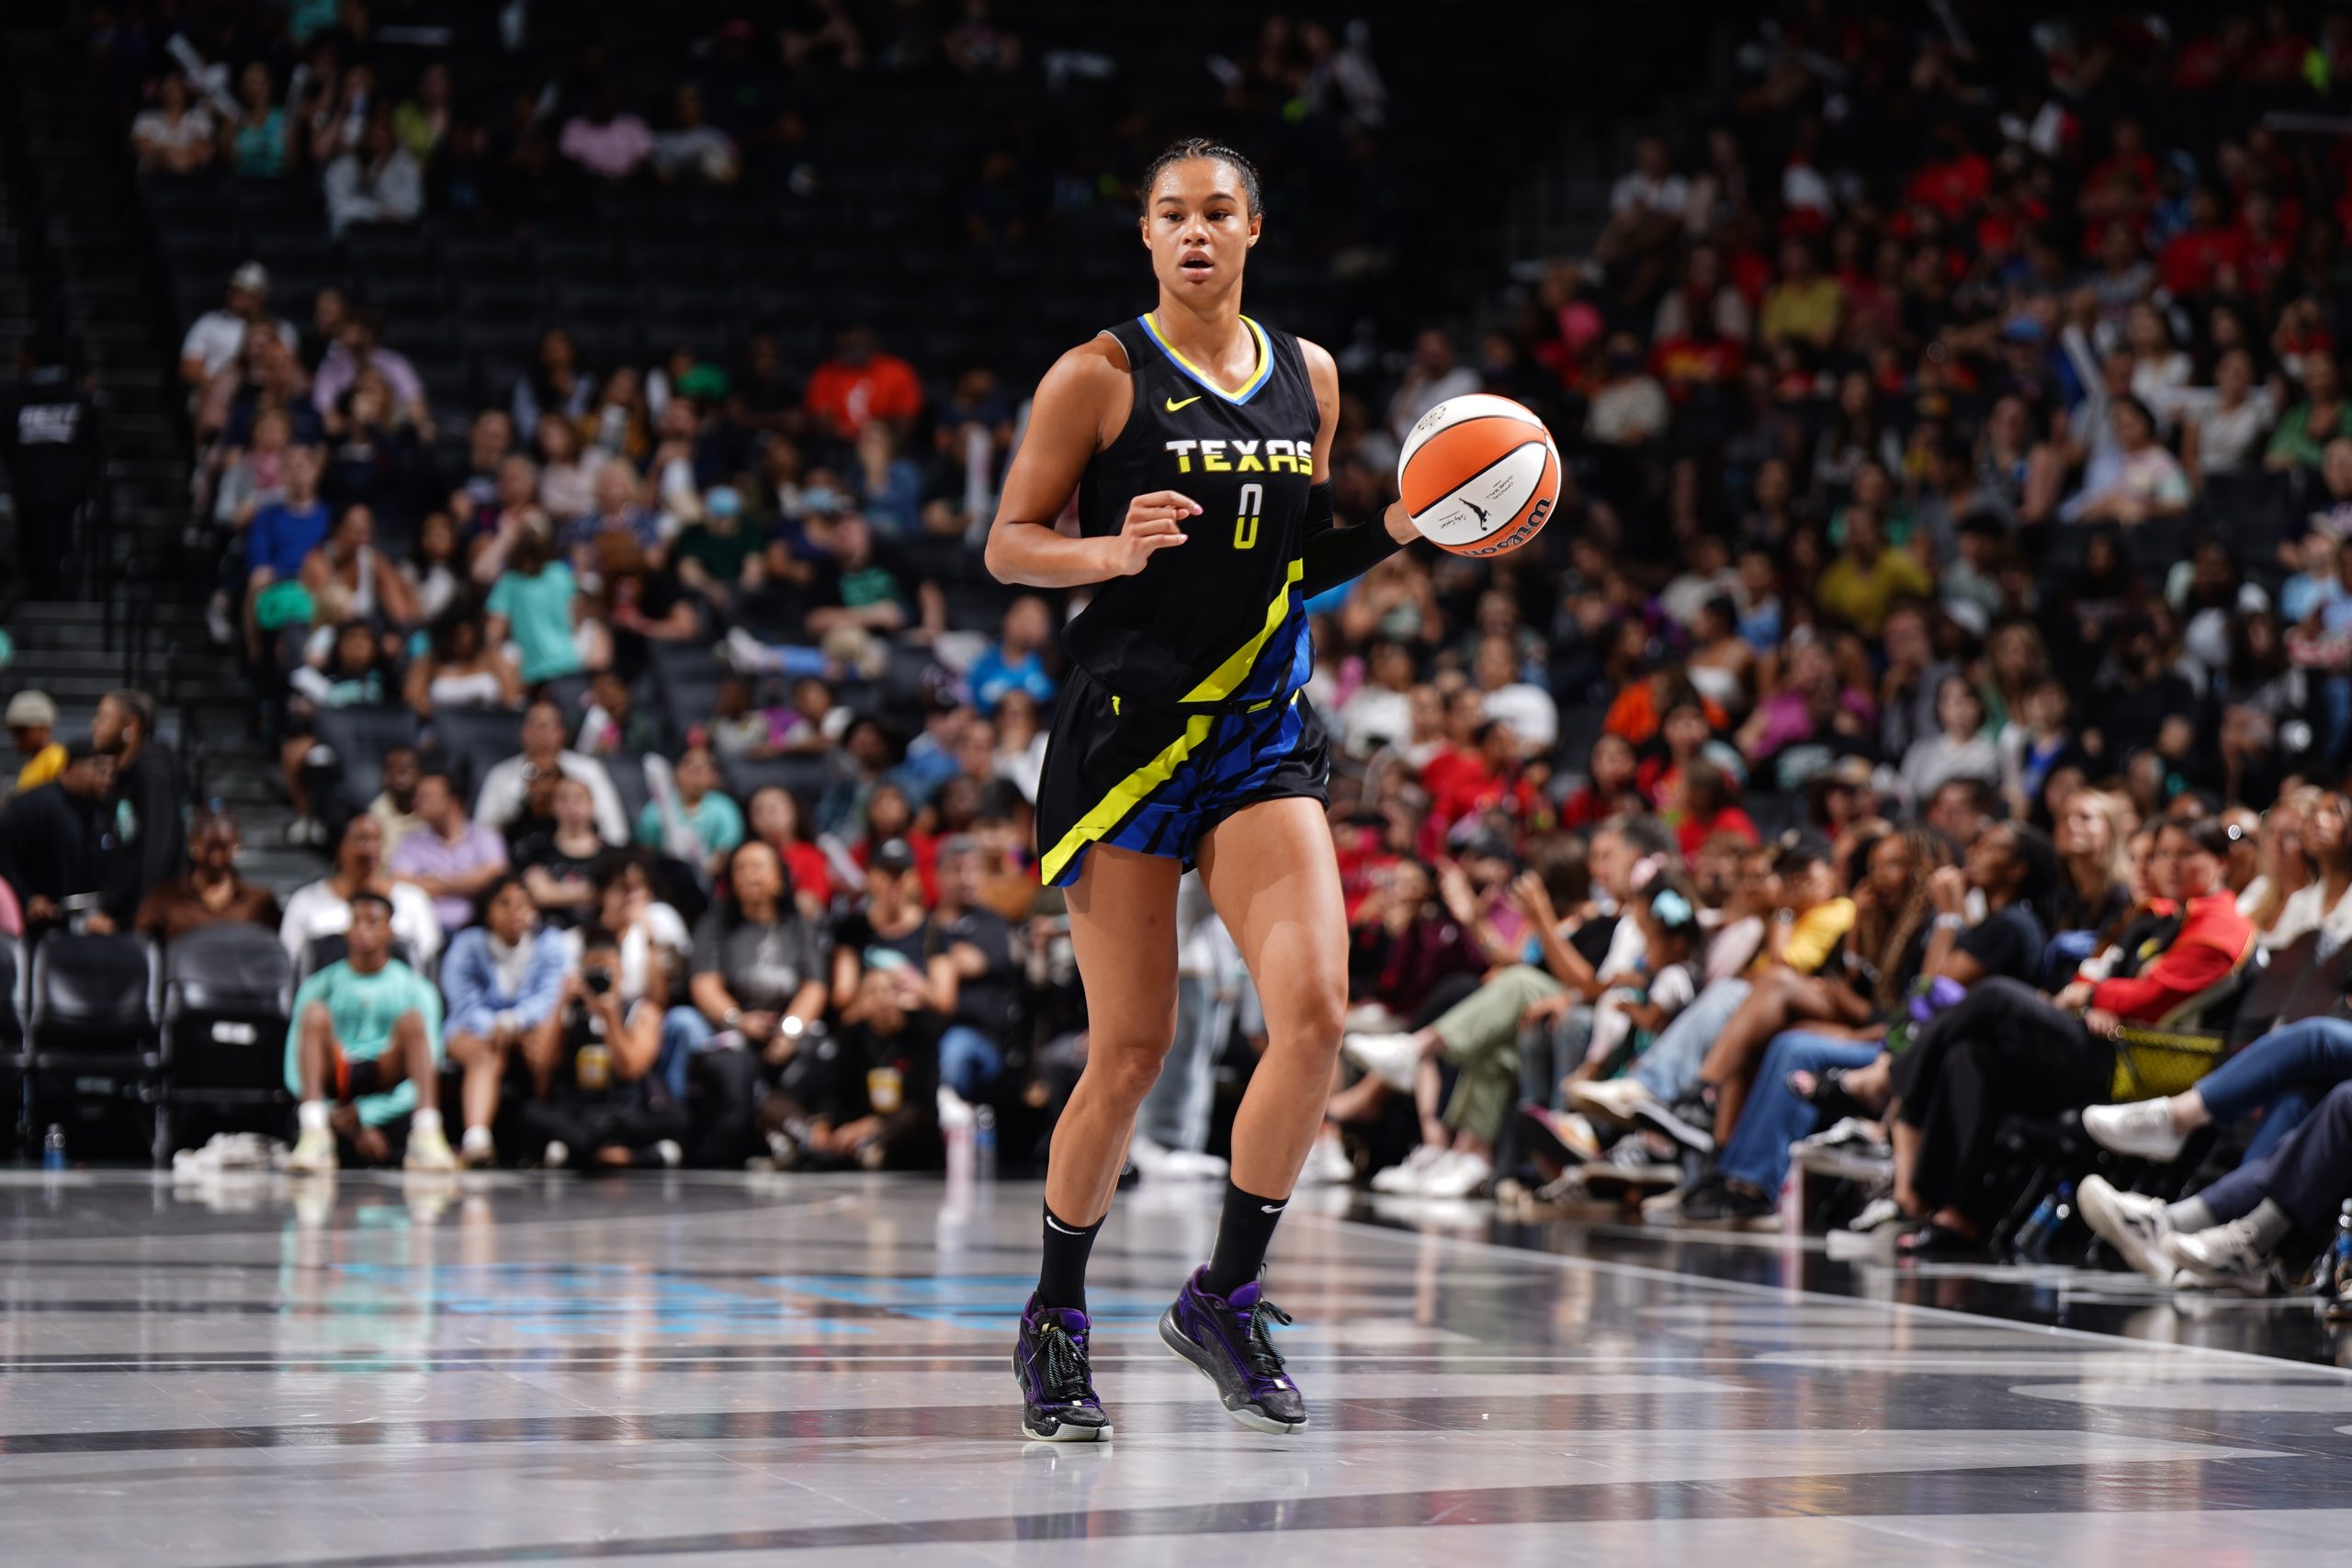 Dallas Wings Satou Sabally Opens Up About Overcoming Injuries and Finding Her Joy Again